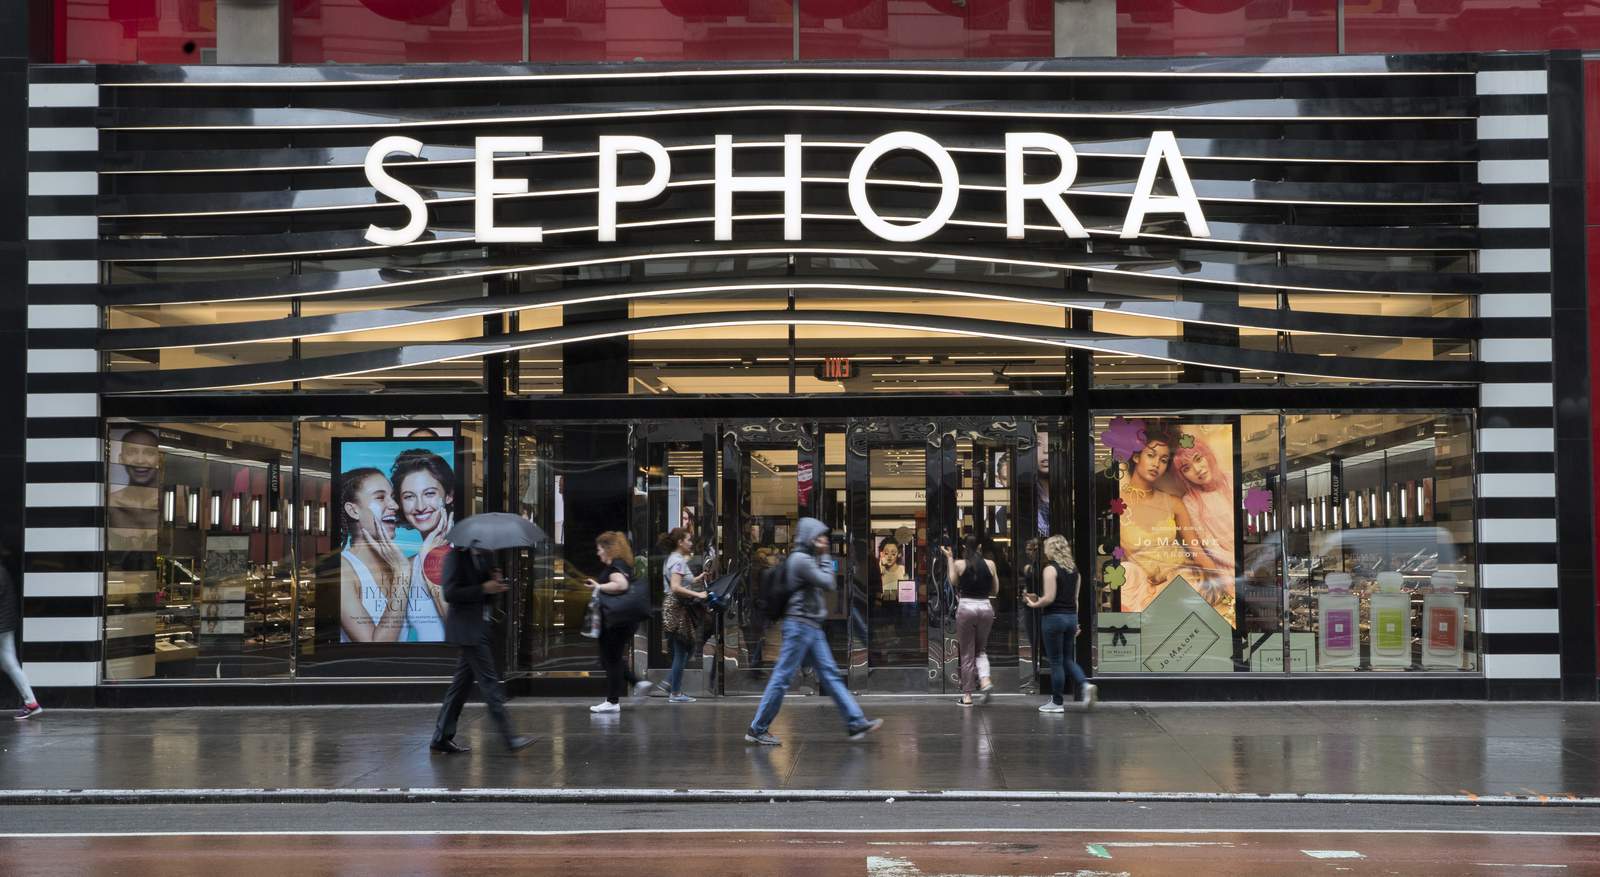 Sephora to fight against racial bias with an action plan